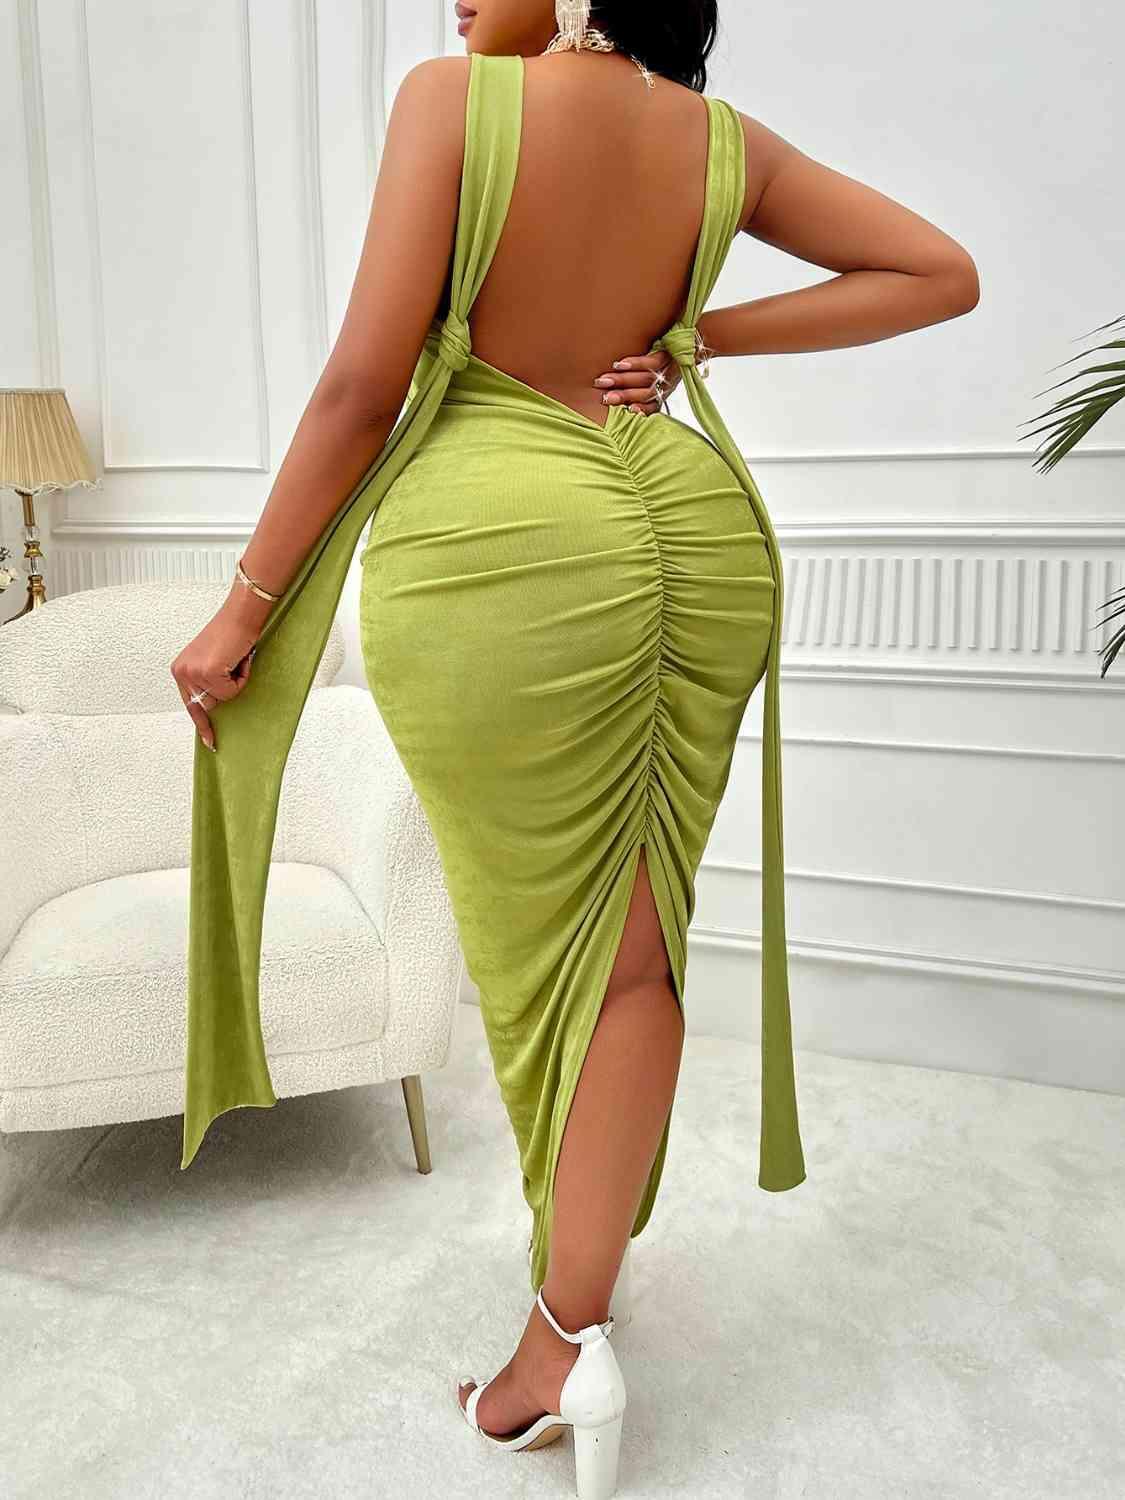 a woman in a green dress with a backless dress